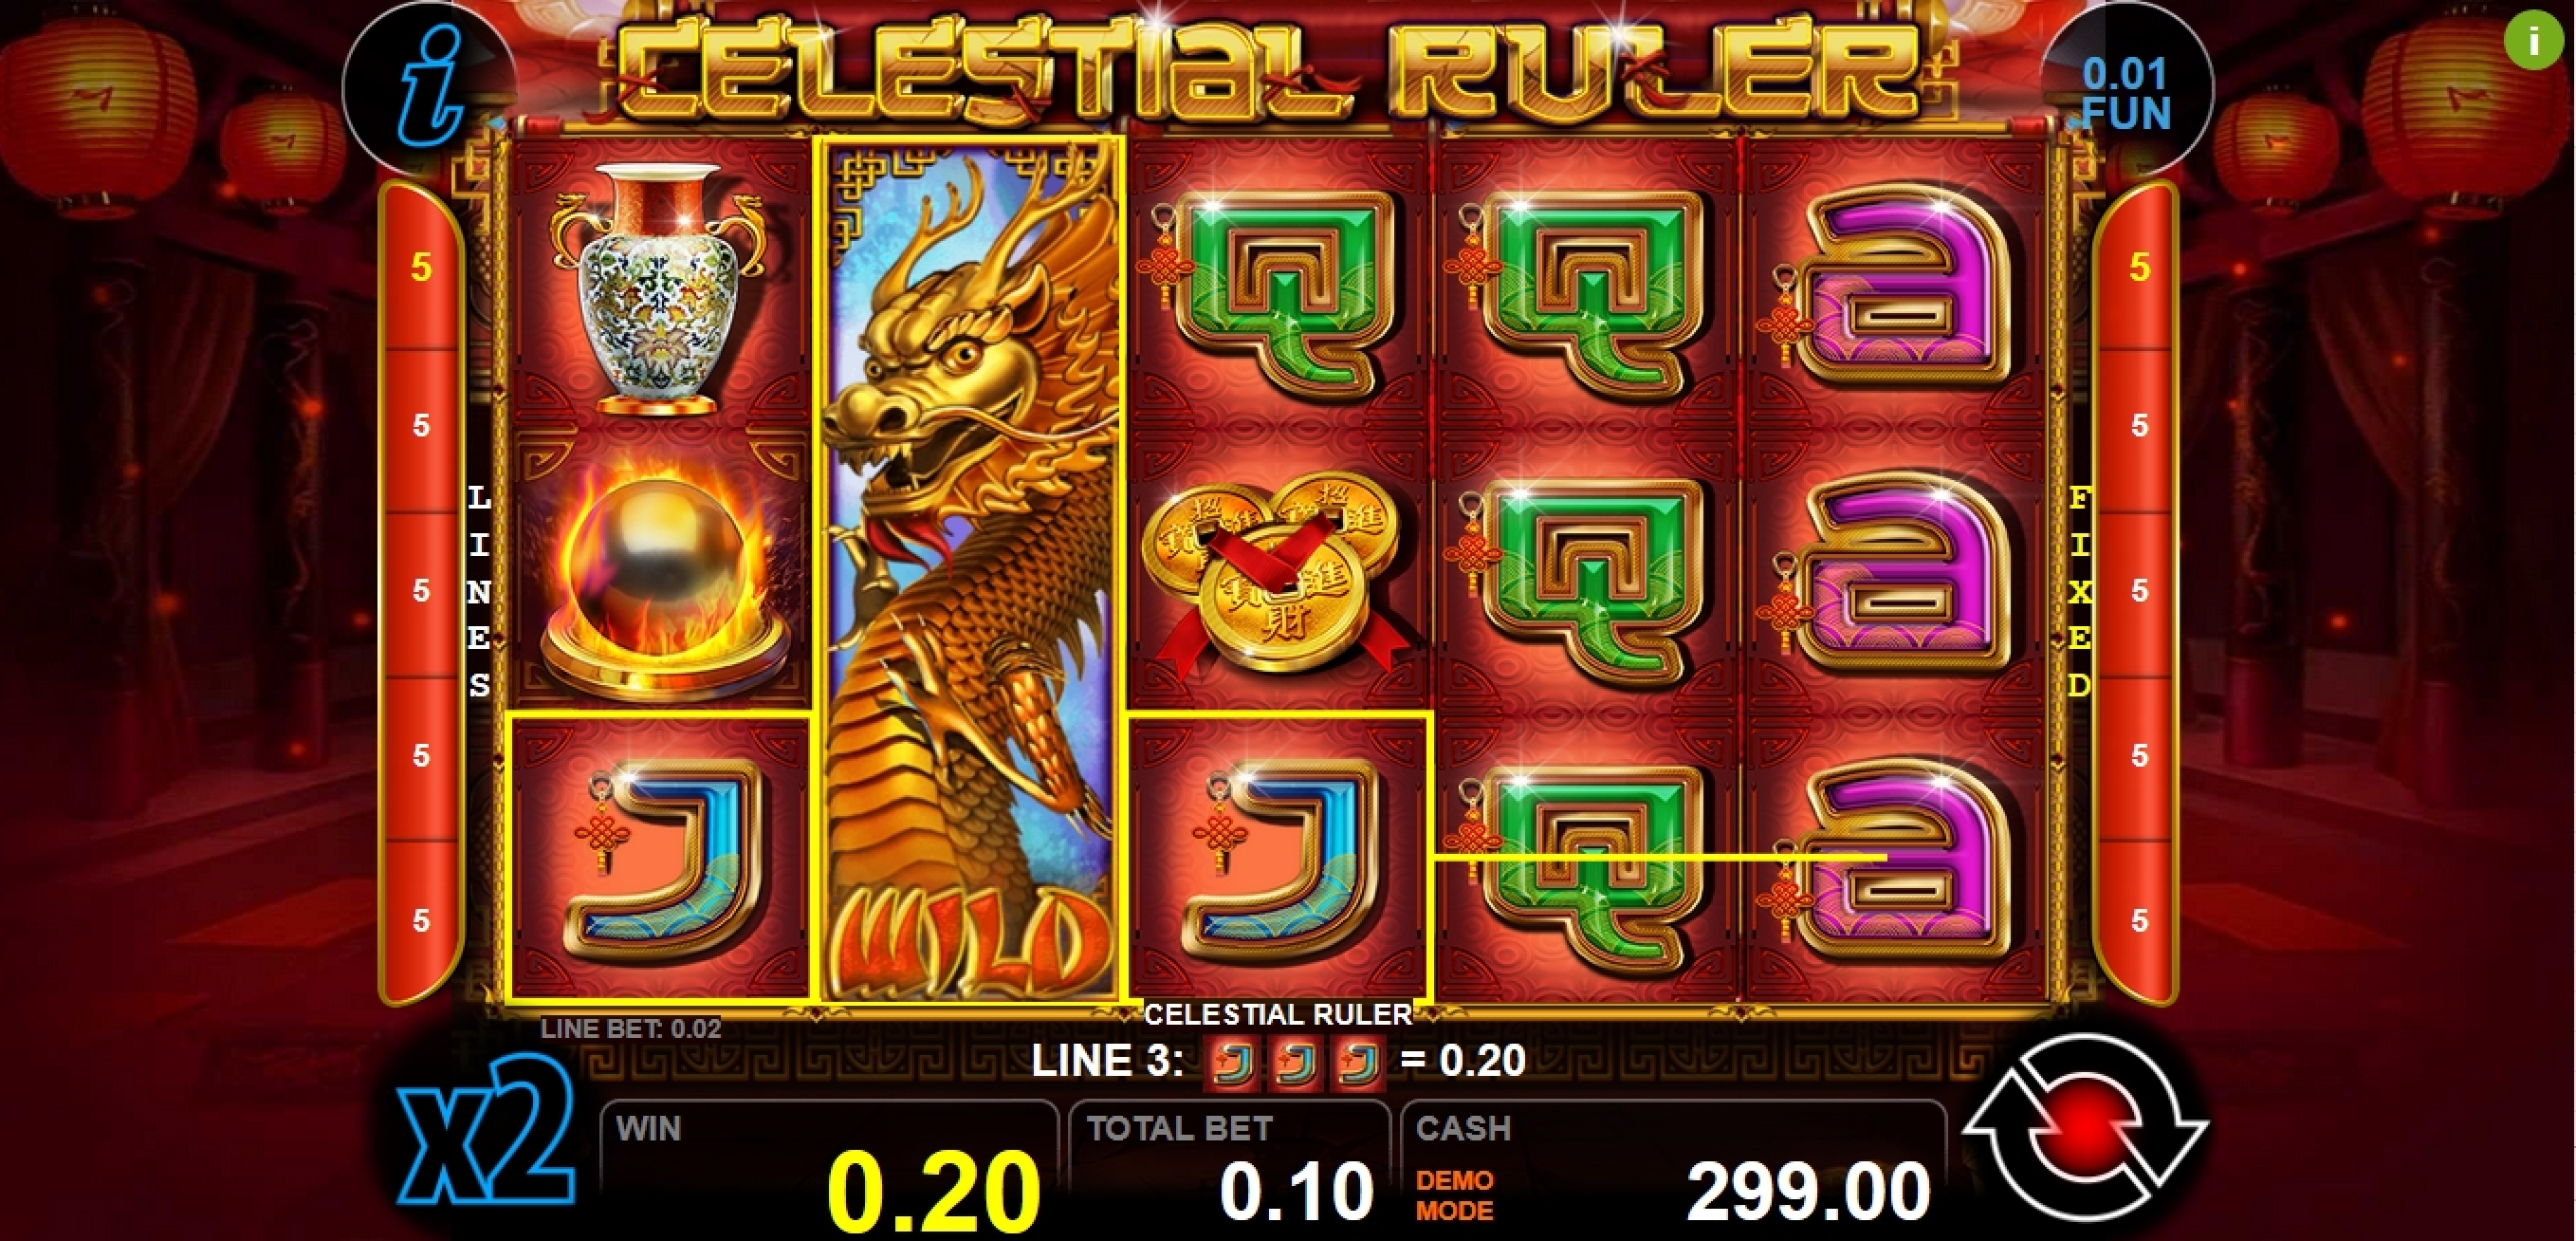 Win Money in Celestial Ruler Free Slot Game by casino technology